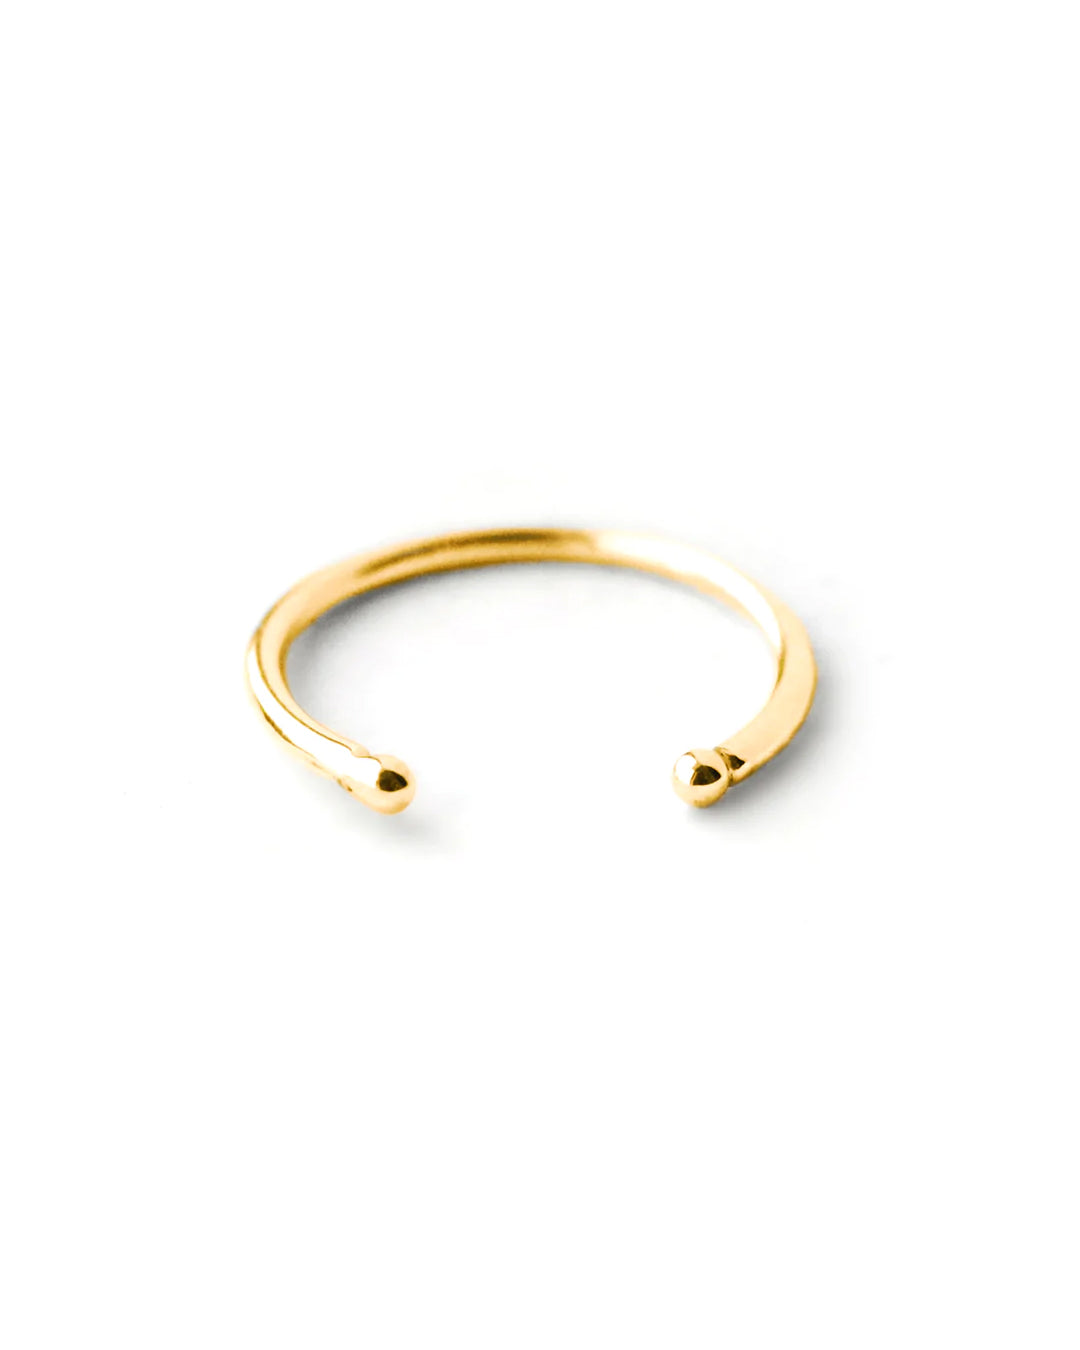 Didier Gold Ring